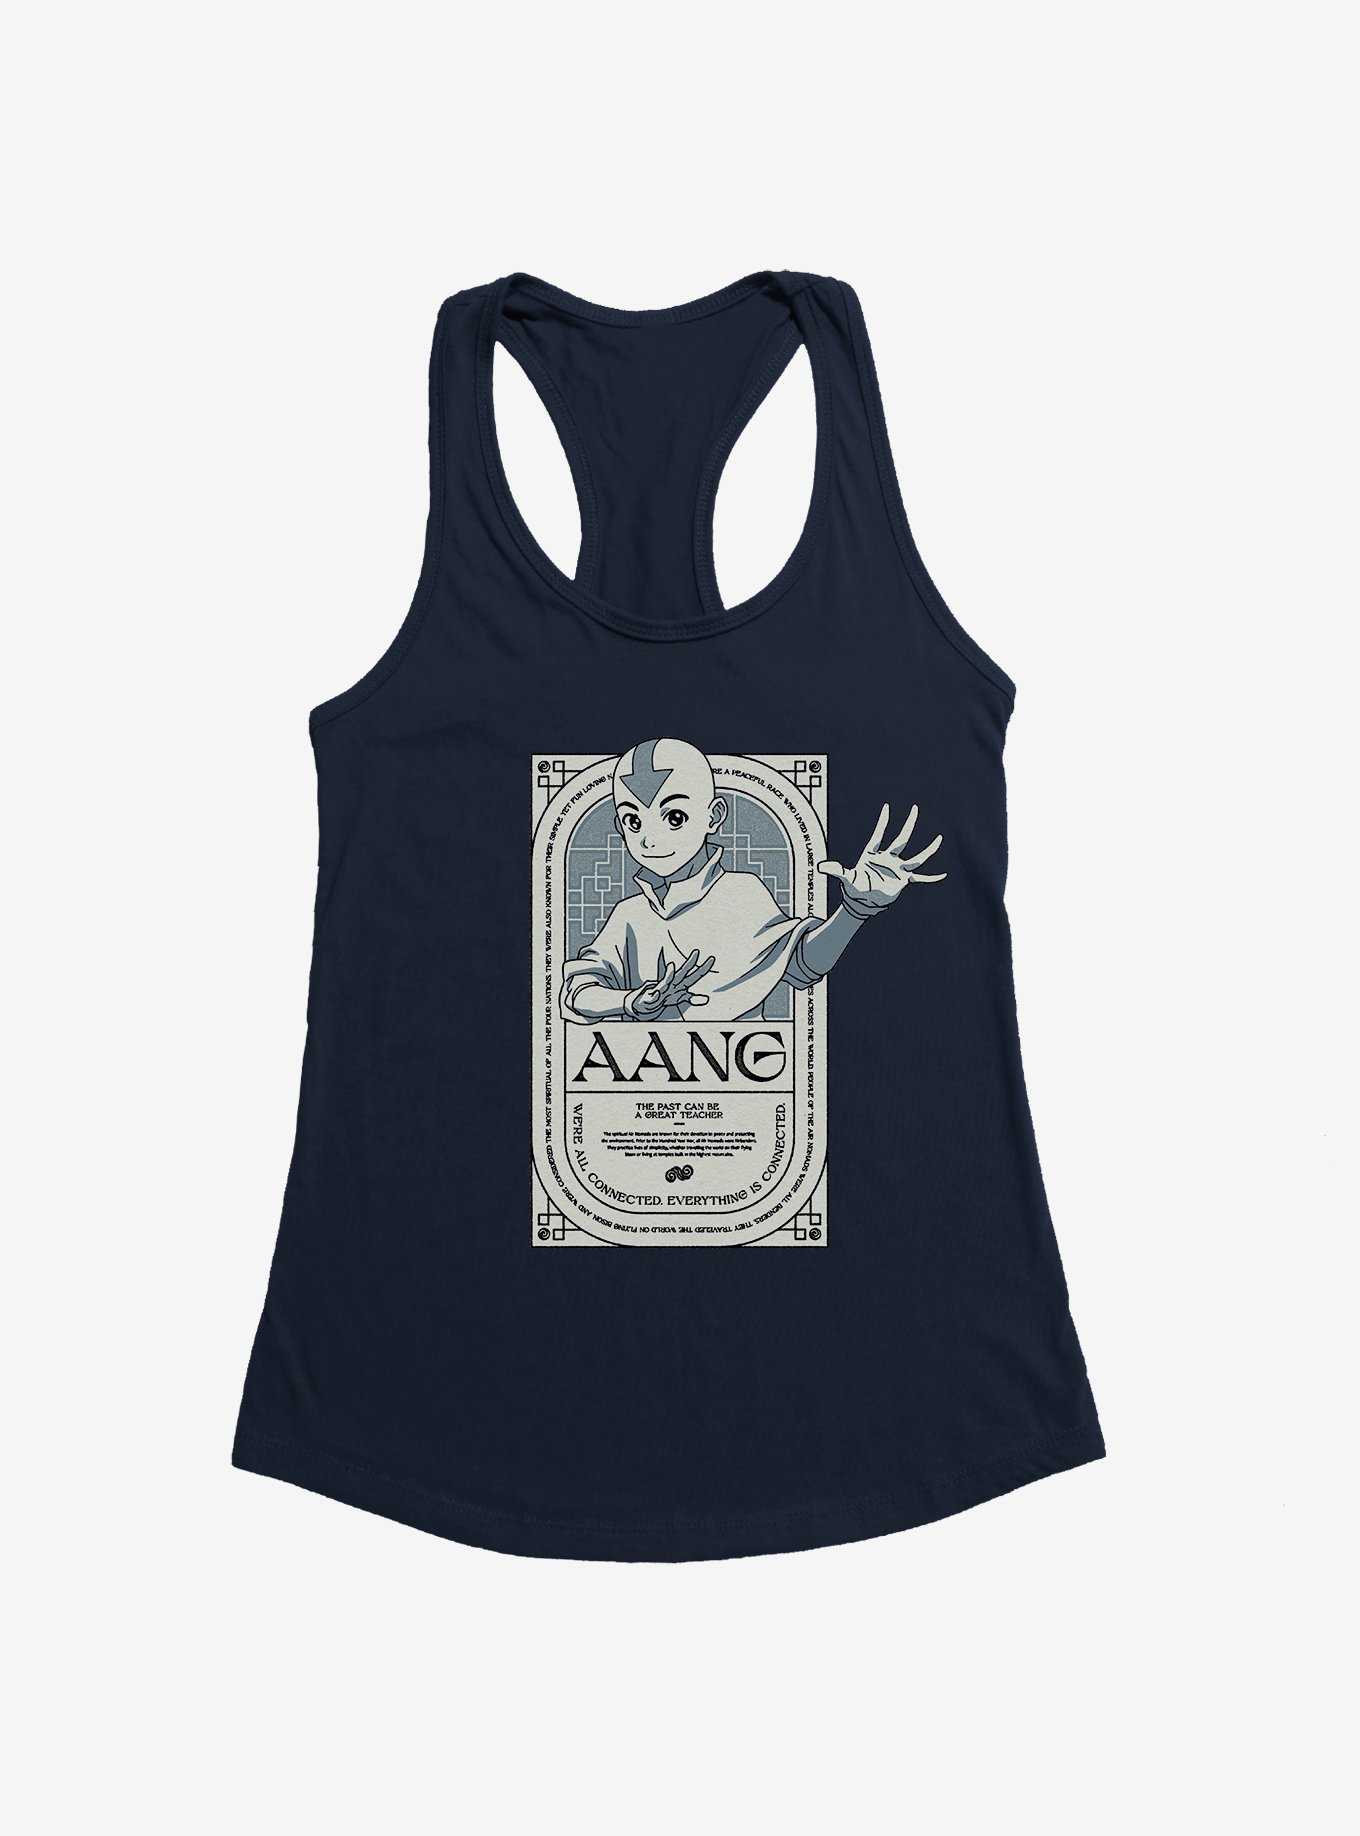 Avatar: The Last Airbender Aang All Connected Girls Tank, , hi-res